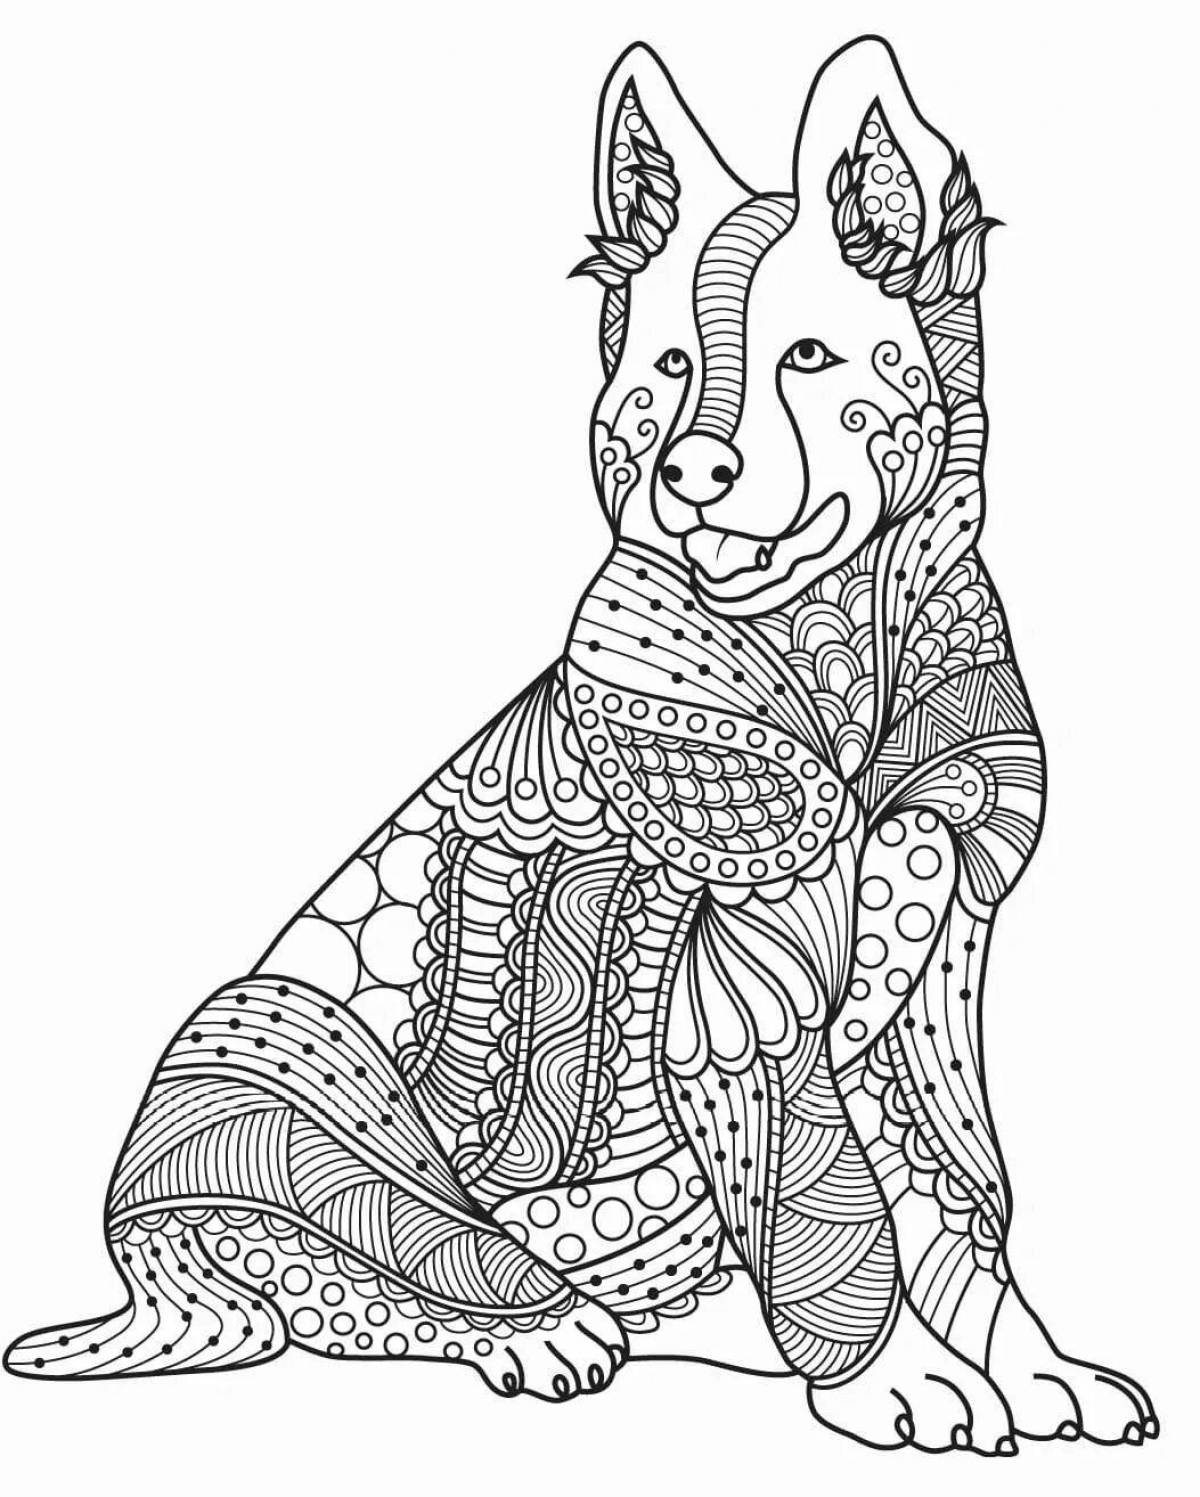 Fancy animal coloring pages for adults